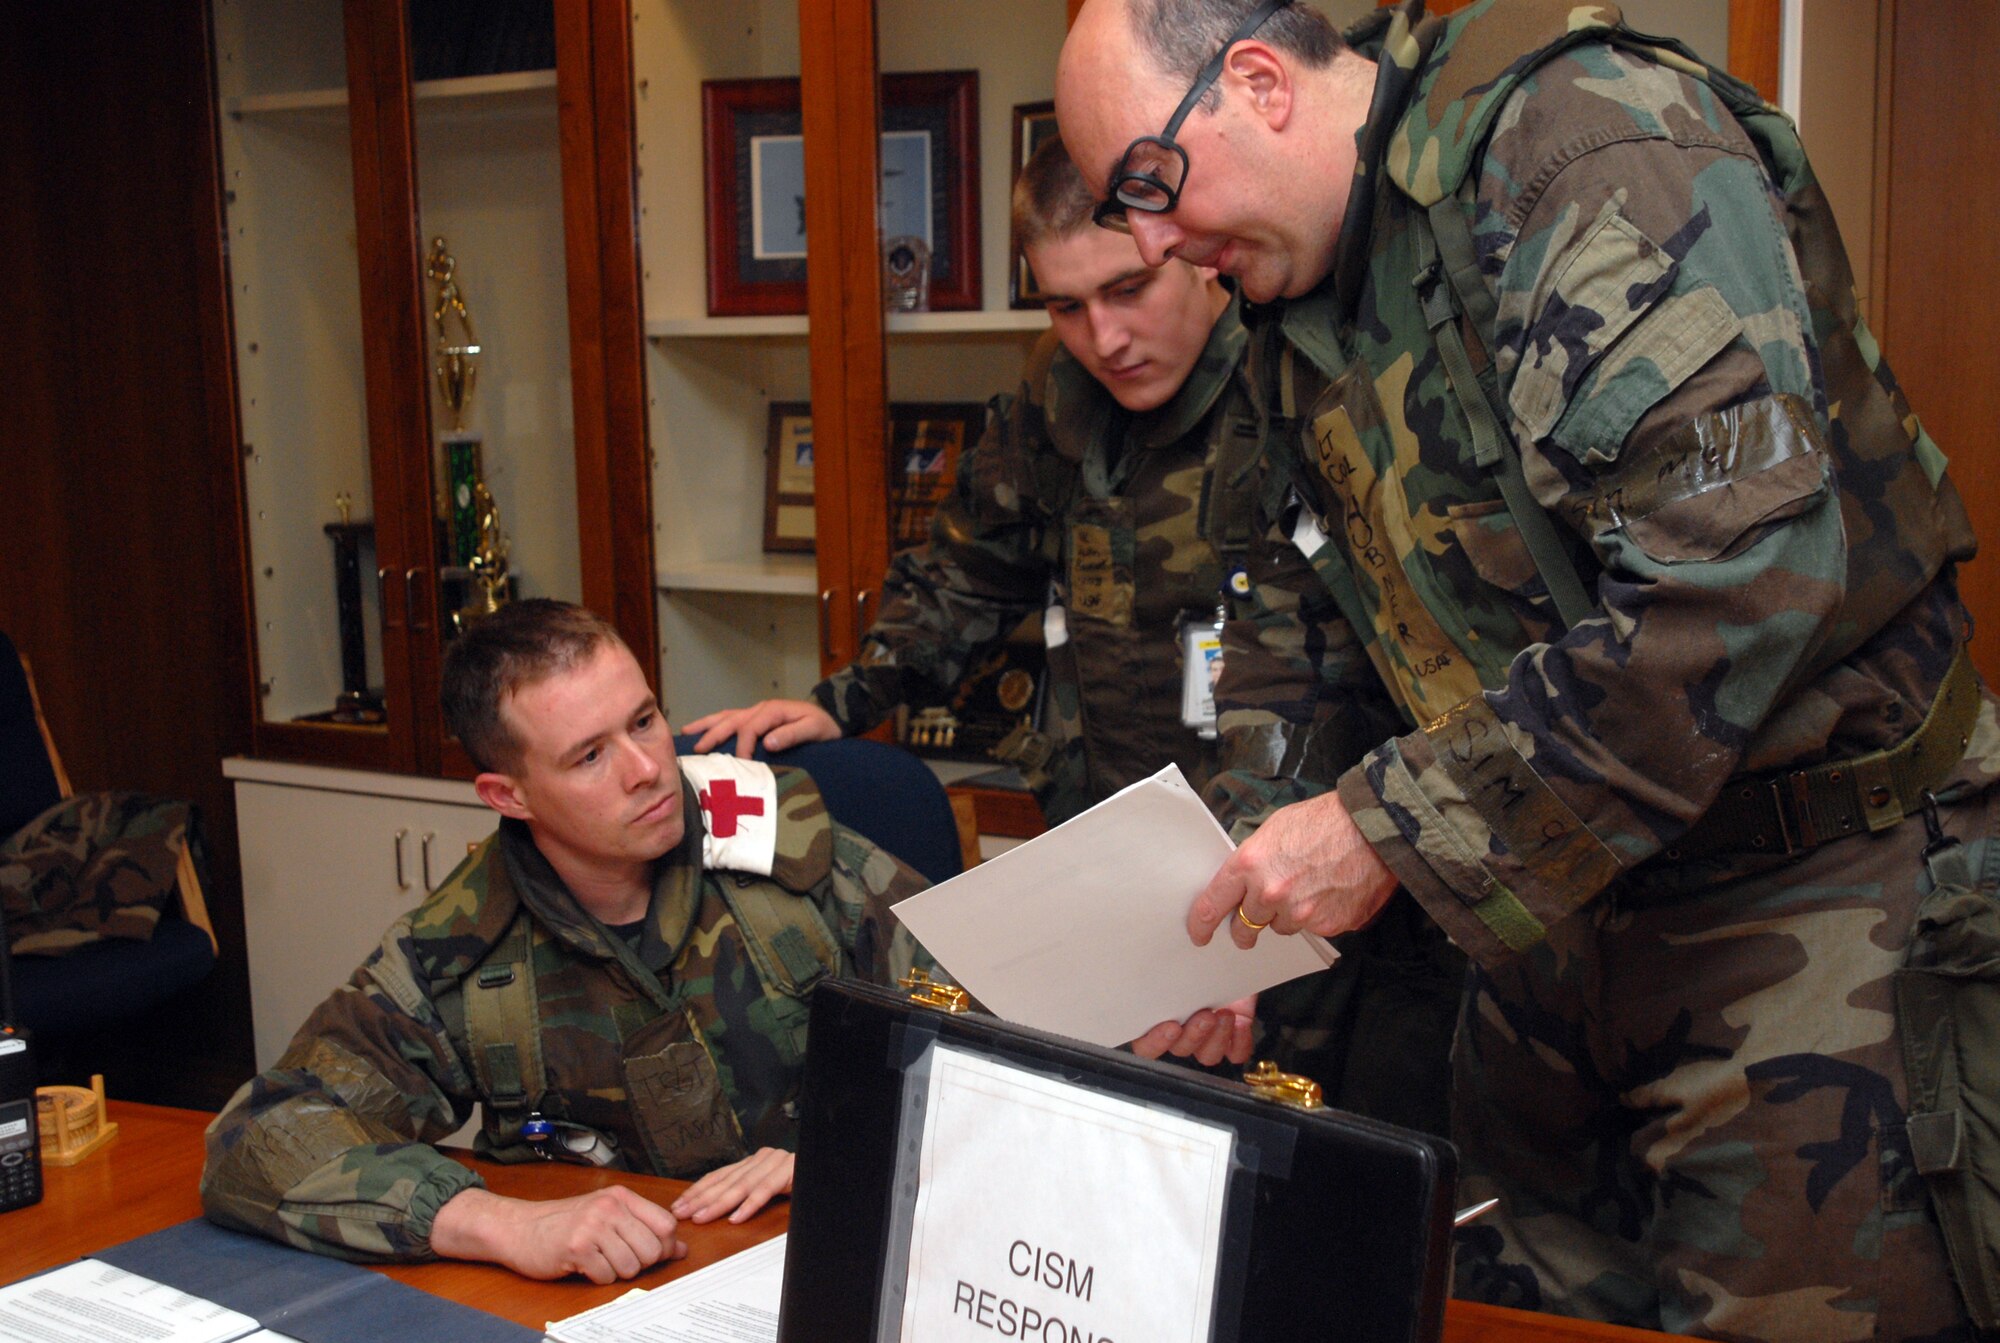 Tech. Sgt. Jason Sharp, Airman 1st Class Justin Beckett and Lt. Col. Mark Hubner, all from the 18th Medical Operations Squadron Mental Health clinic, review procedures to use in response to scenarios during Local Operational Readiness Exercise Beverly High 08-2 at Kadena Air Base, Japan, Dec. 5, 2007. These scenarios enable base agencies to work together, mitigate real-world situations, and heighten readiness capabilities.
(U.S. Air Force photo/Staff Sgt. Christopher Marasky)